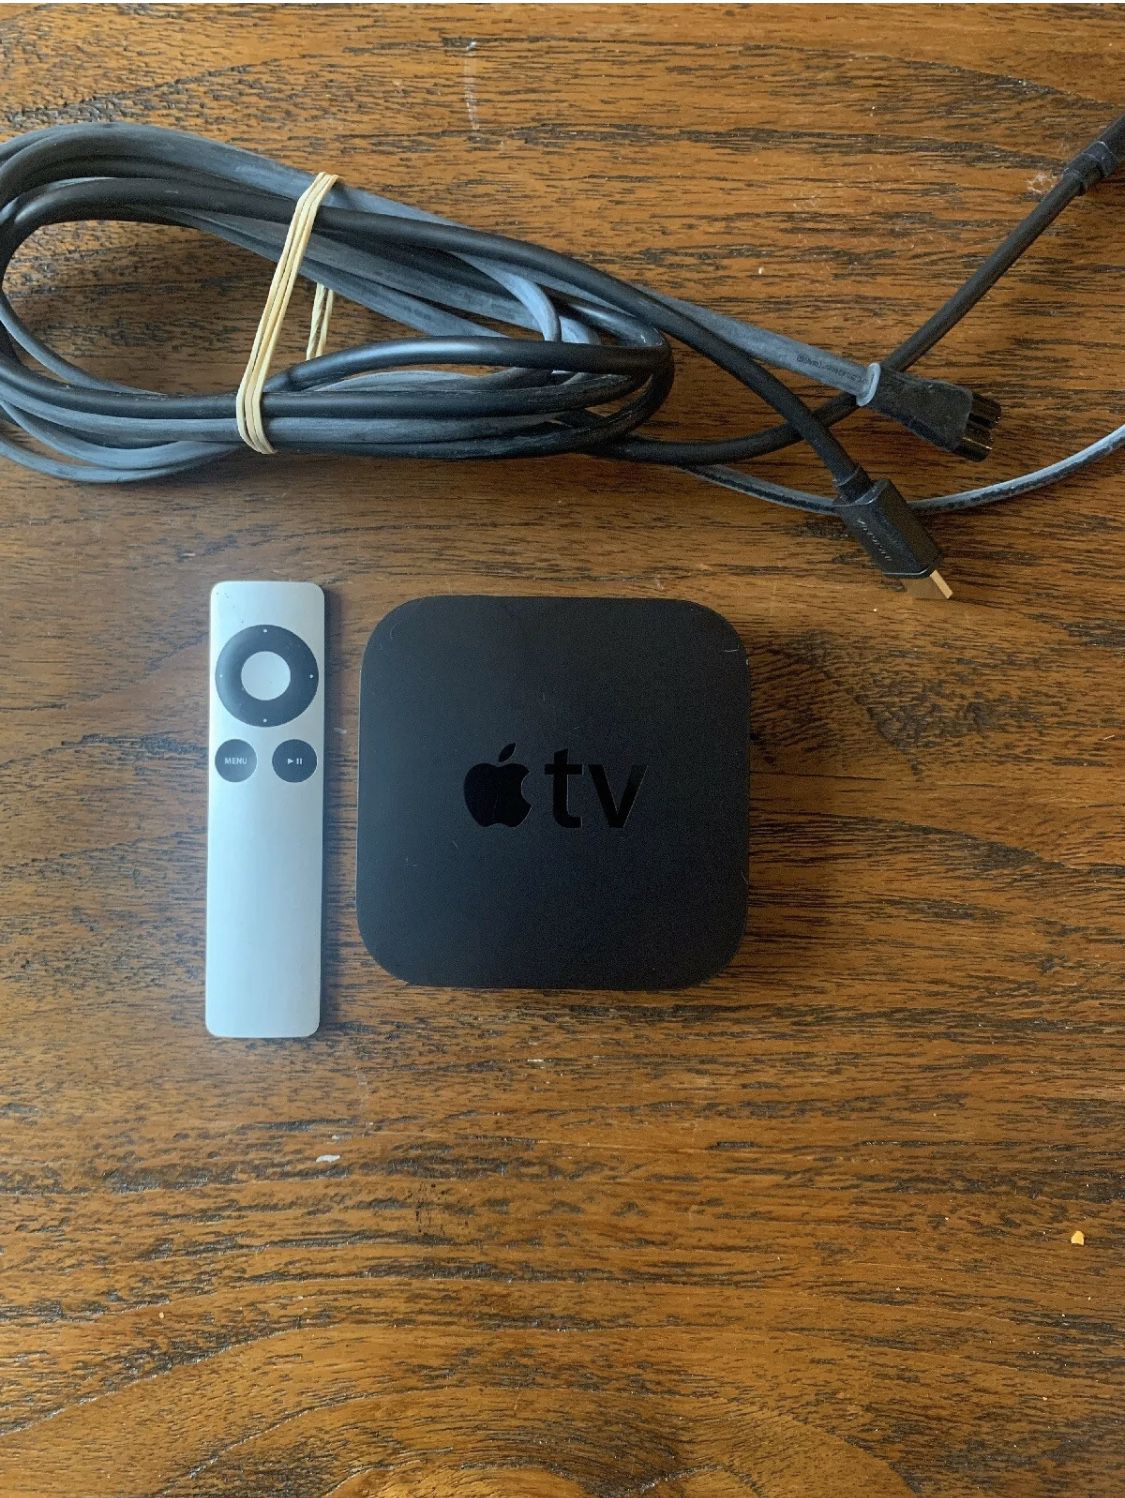 Apple TV, 2nd Generation 8 GB Media Streamer A -1378 with Remote & Power Cable